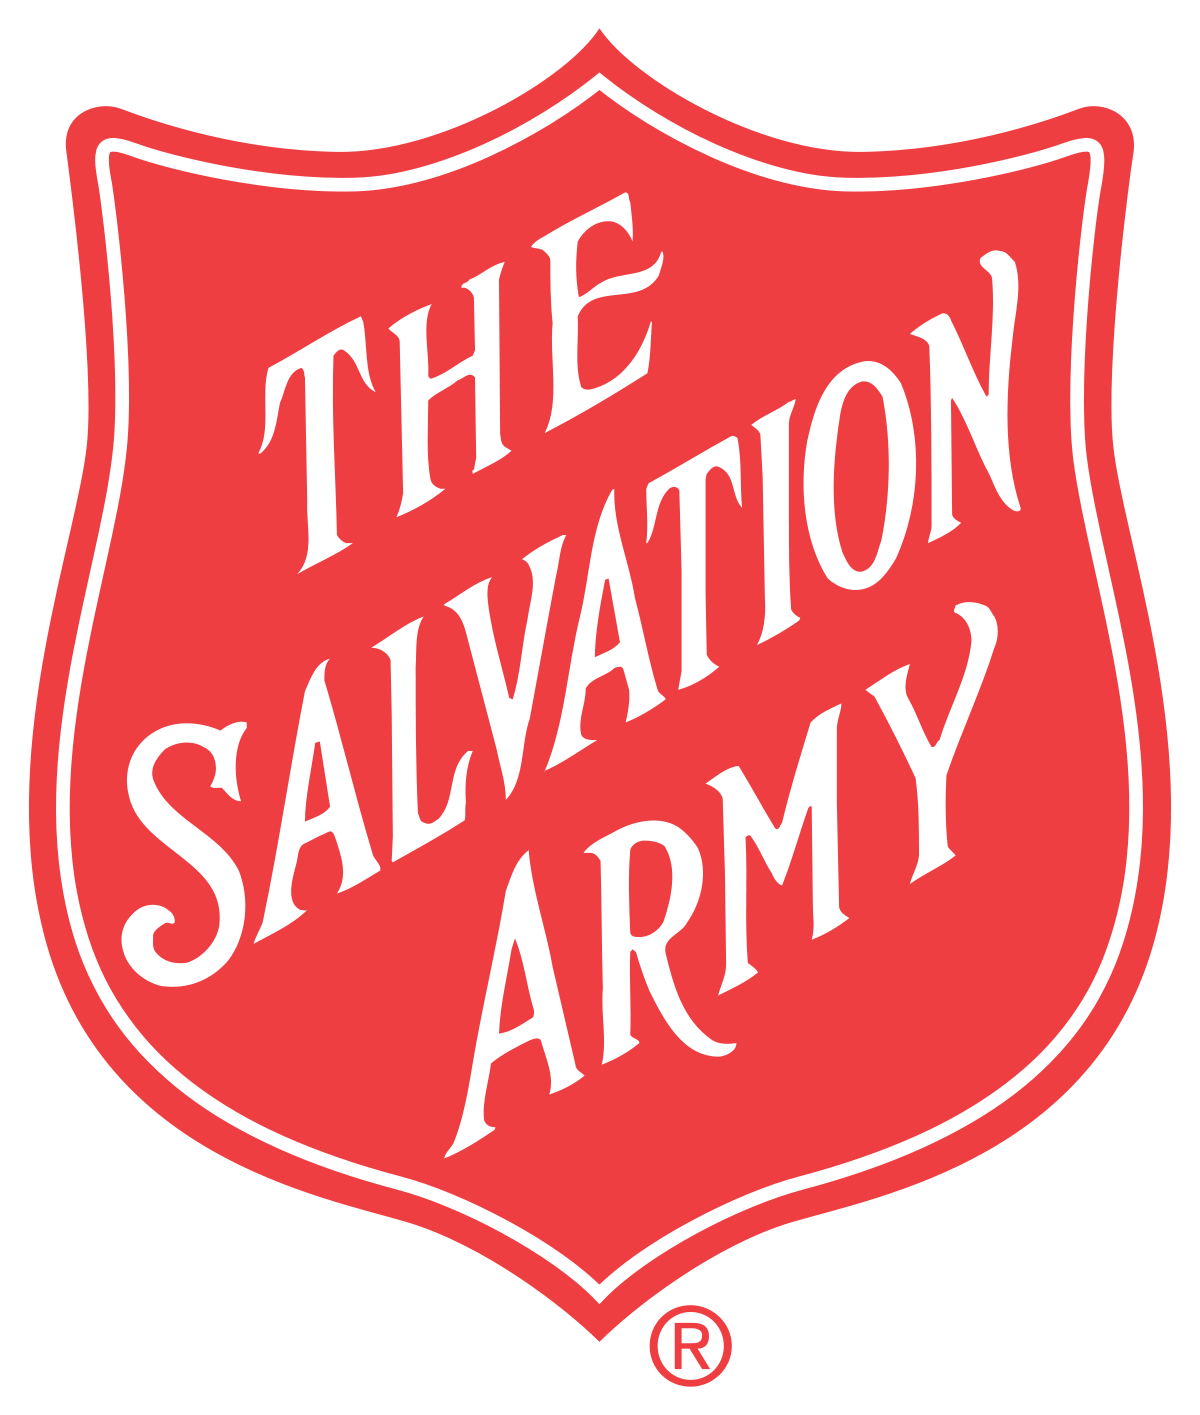 Salvation Army Red Shield Logo - The Salvation Army